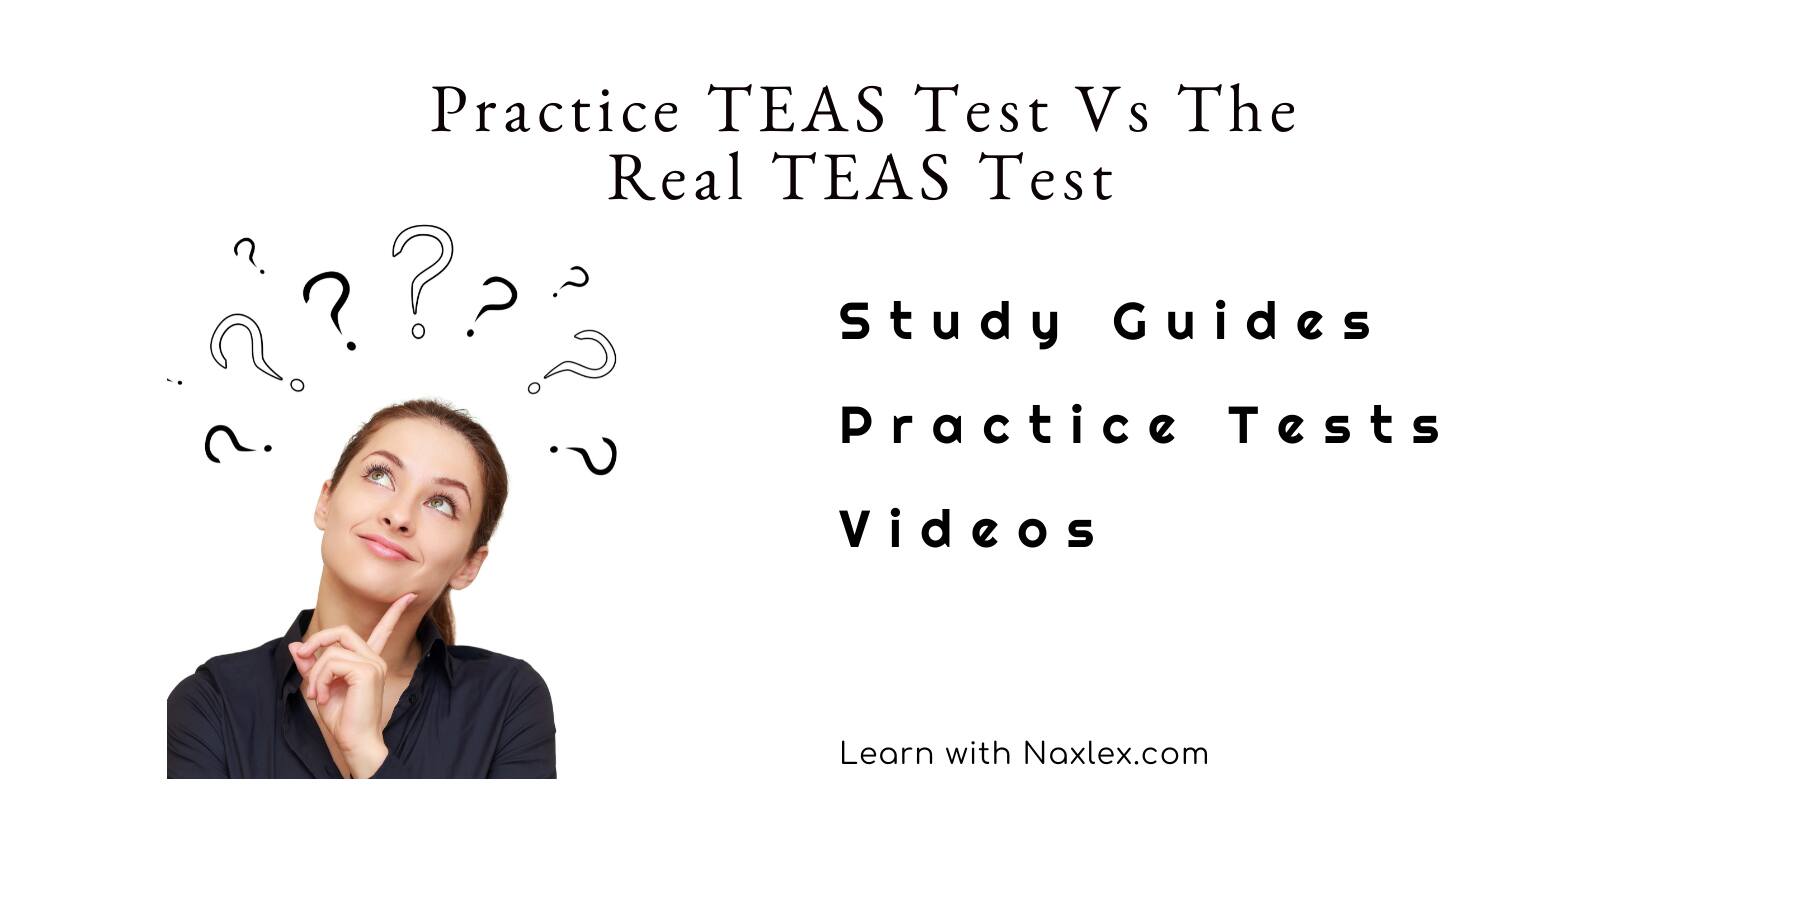 How Close Is the Practice TEAS Test to the Real Test?